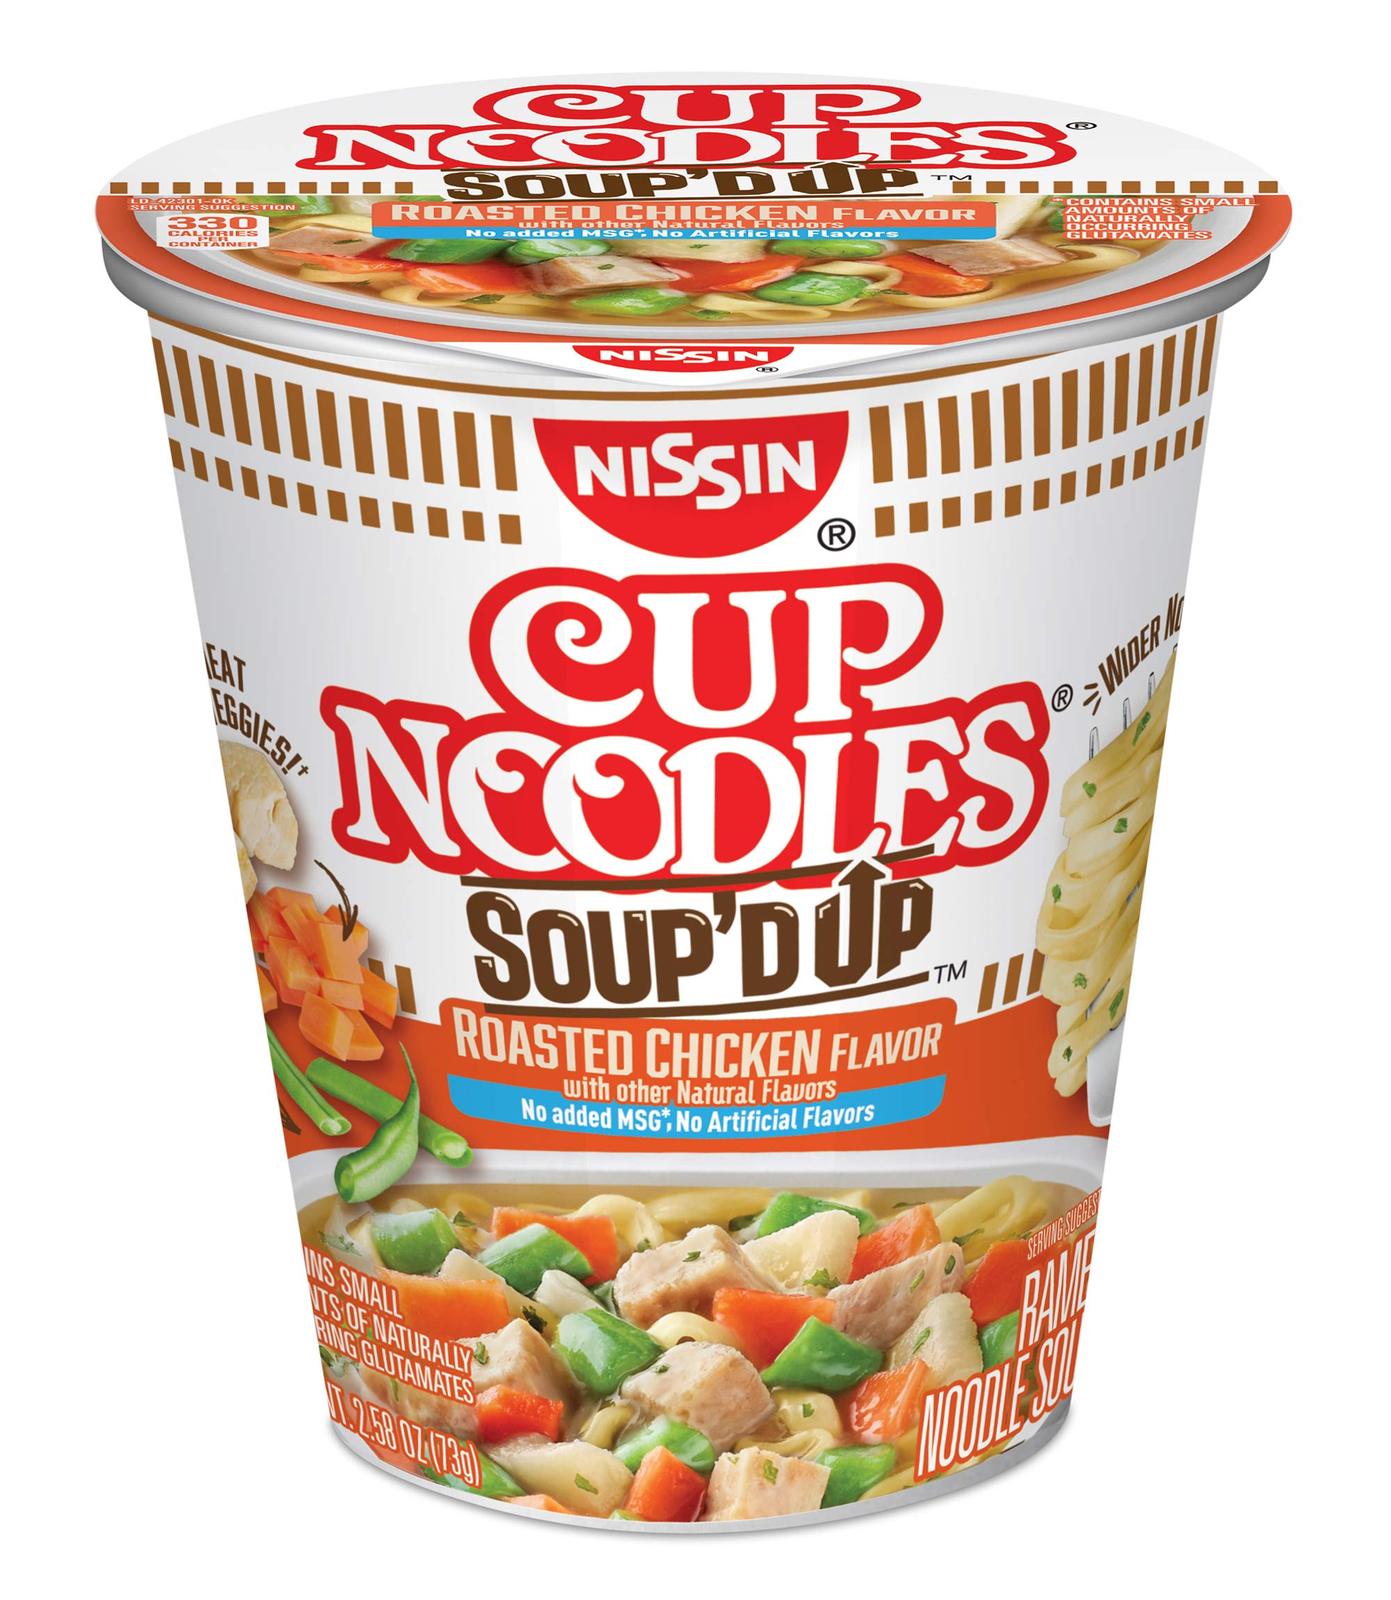 Nissin Cup Noodles Soup'd Up Roasted Chicken, 2.58 Ounce (Pack of 6) - Soup